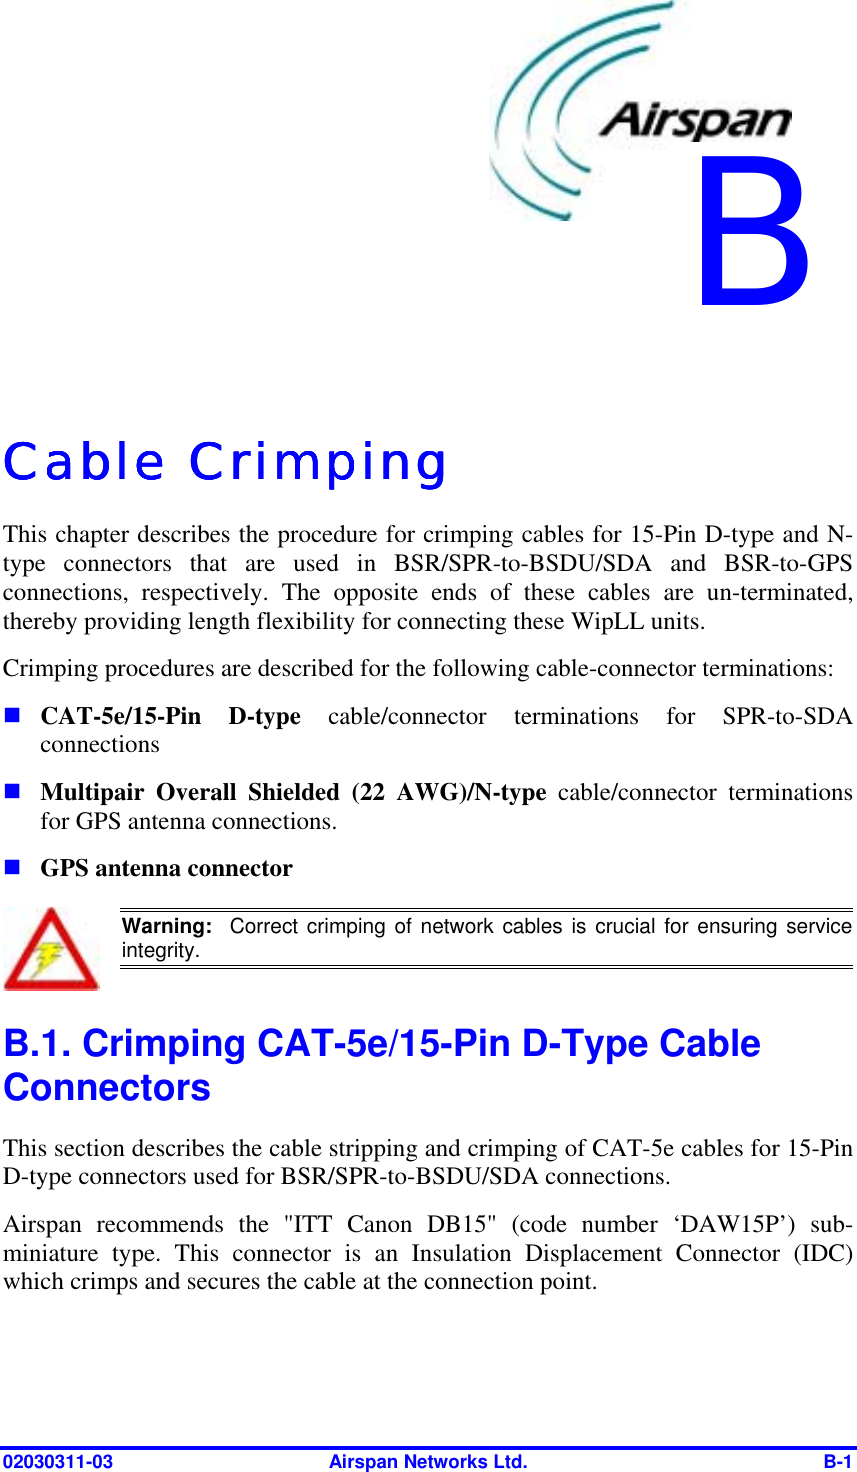  02030311-03  Airspan Networks Ltd.  B-1   Cable CrimpingCable CrimpingCable CrimpingCable Crimping    This chapter describes the procedure for crimping cables for 15-Pin D-type and N-type connectors that are used in BSR/SPR-to-BSDU/SDA and BSR-to-GPS connections, respectively. The opposite ends of these cables are un-terminated, thereby providing length flexibility for connecting these WipLL units. Crimping procedures are described for the following cable-connector terminations: ! CAT-5e/15-Pin D-type cable/connector terminations for SPR-to-SDA connections ! Multipair Overall Shielded (22 AWG)/N-type cable/connector terminations for GPS antenna connections. ! GPS antenna connector  Warning:  Correct crimping of network cables is crucial for ensuring serviceintegrity. B.1. Crimping CAT-5e/15-Pin D-Type Cable Connectors This section describes the cable stripping and crimping of CAT-5e cables for 15-Pin D-type connectors used for BSR/SPR-to-BSDU/SDA connections.  Airspan recommends the &quot;ITT Canon DB15&quot; (code number ‘DAW15P’) sub-miniature type. This connector is an Insulation Displacement Connector (IDC) which crimps and secures the cable at the connection point. B